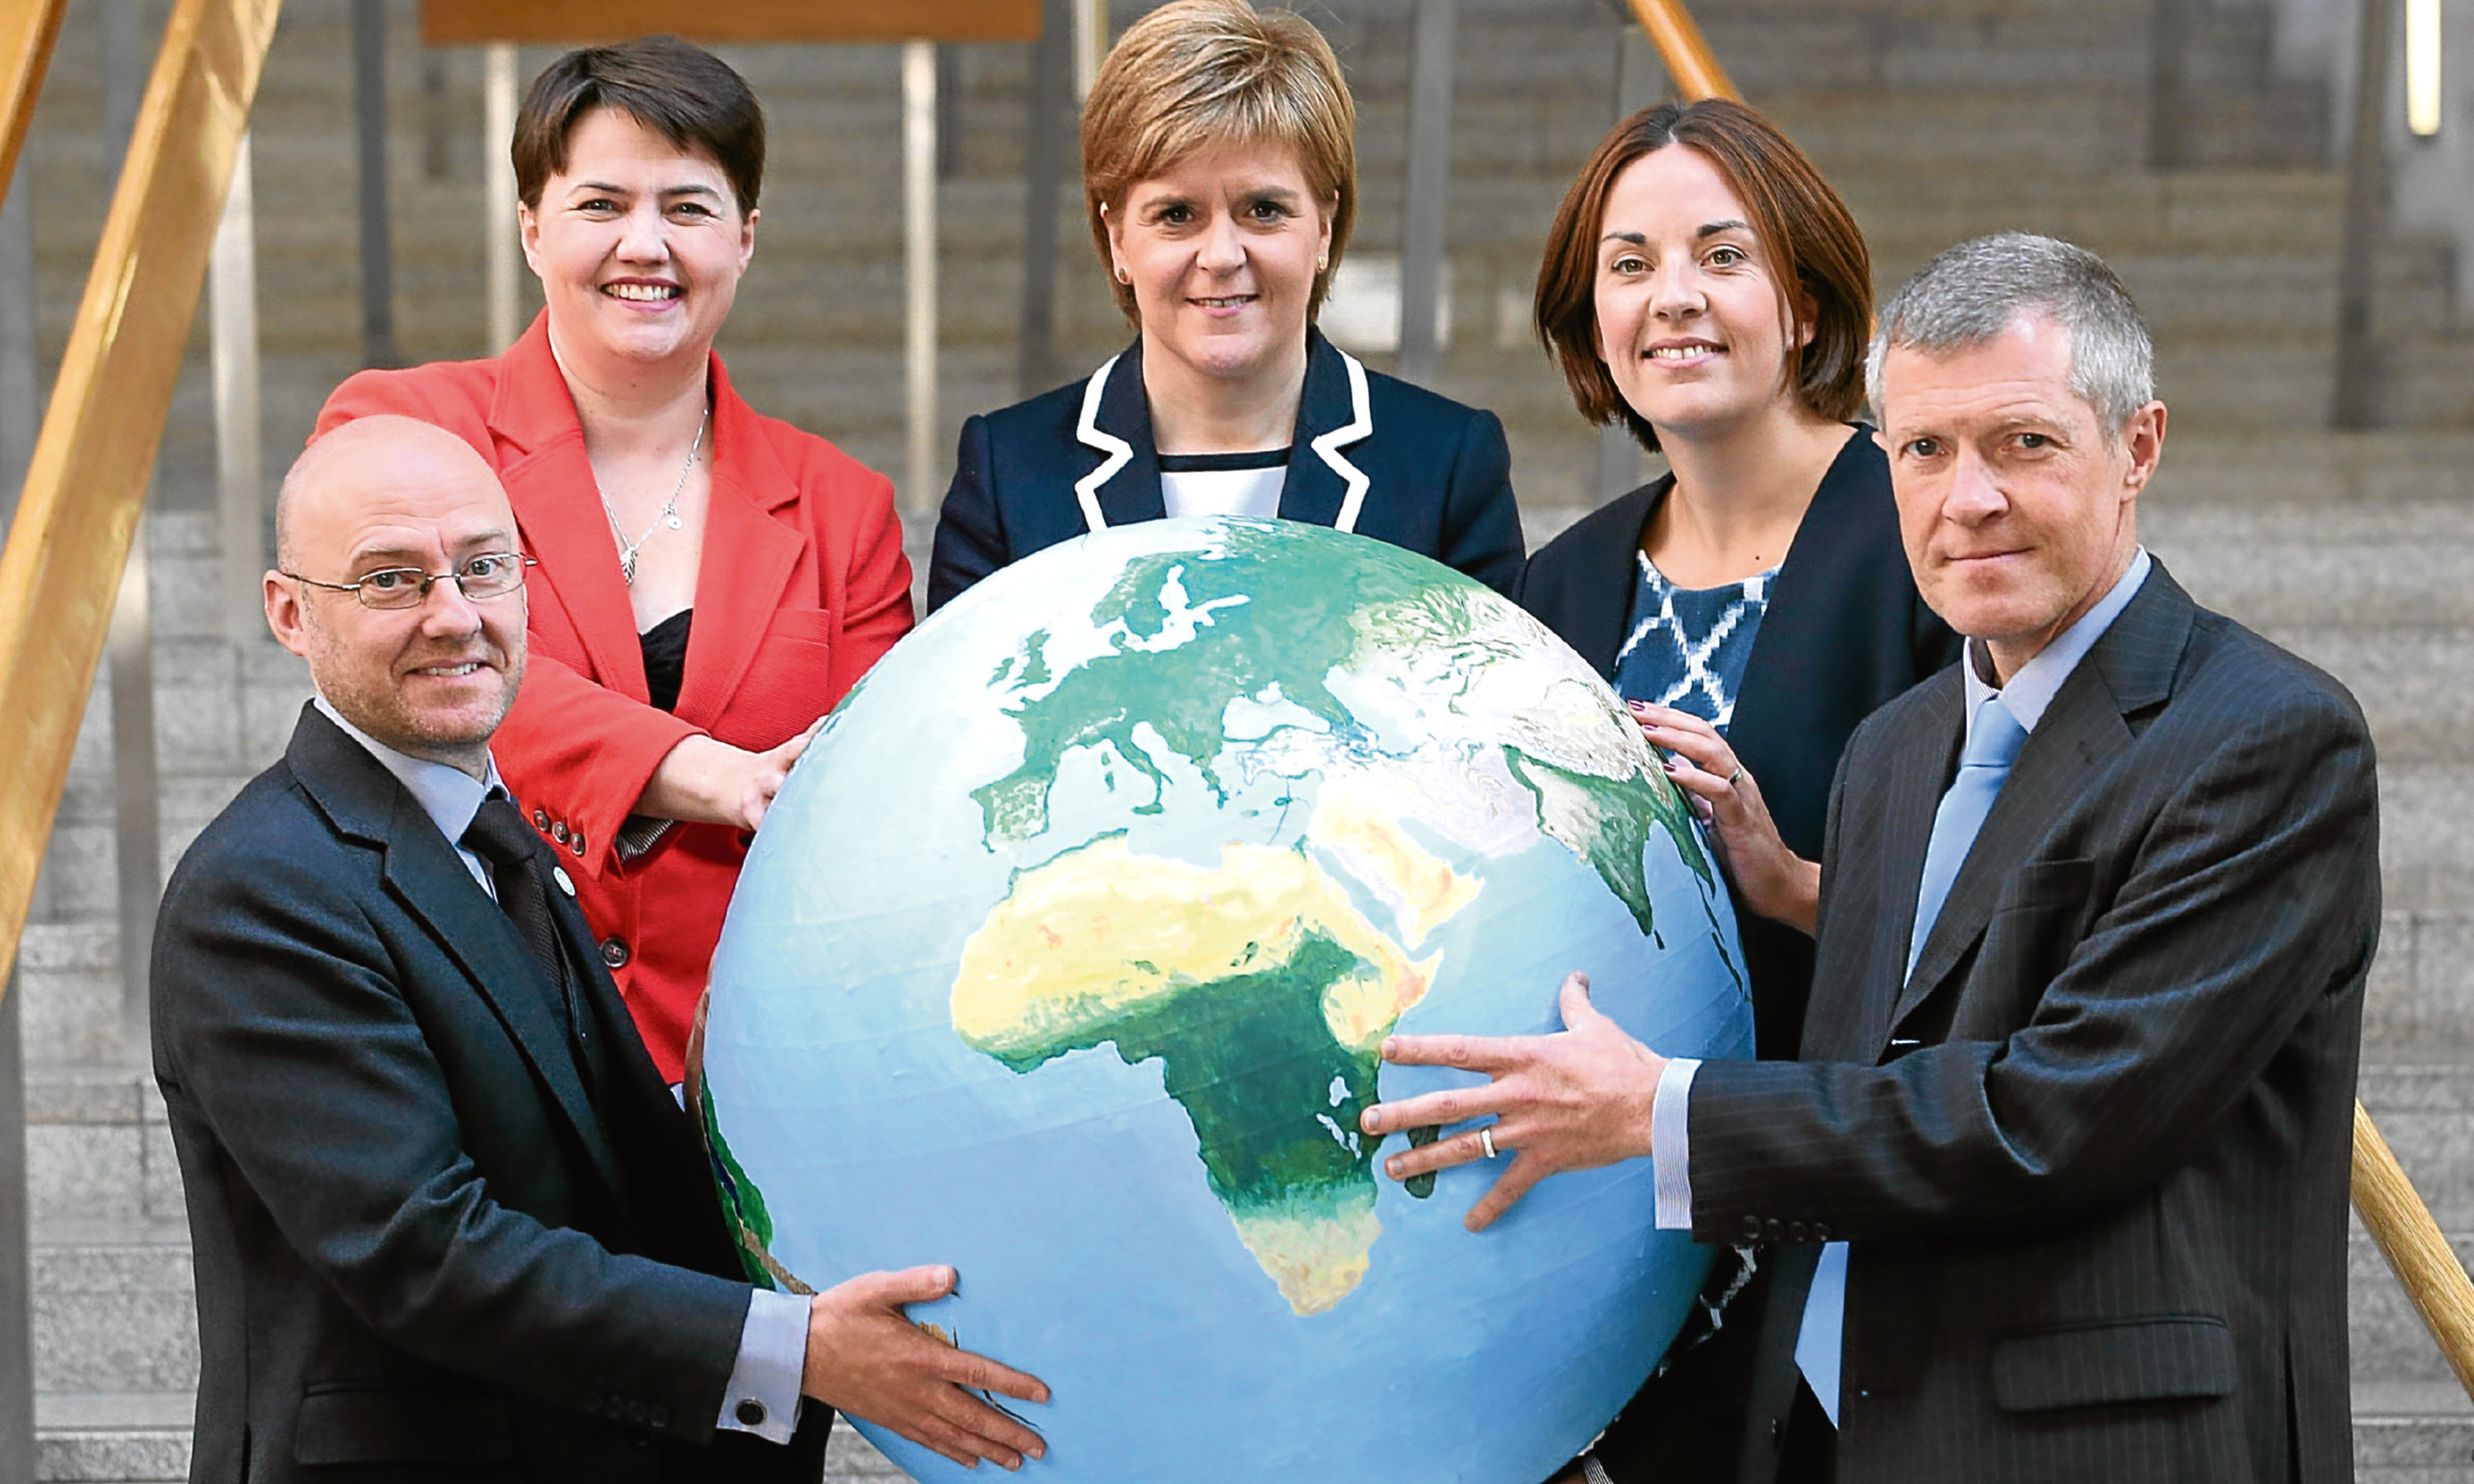 Scotland’s party leaders, from left, Patrick Harvie, Ruth Davidson, Nicola Sturgeon, Kesia Dugdale and Willie Rennie.